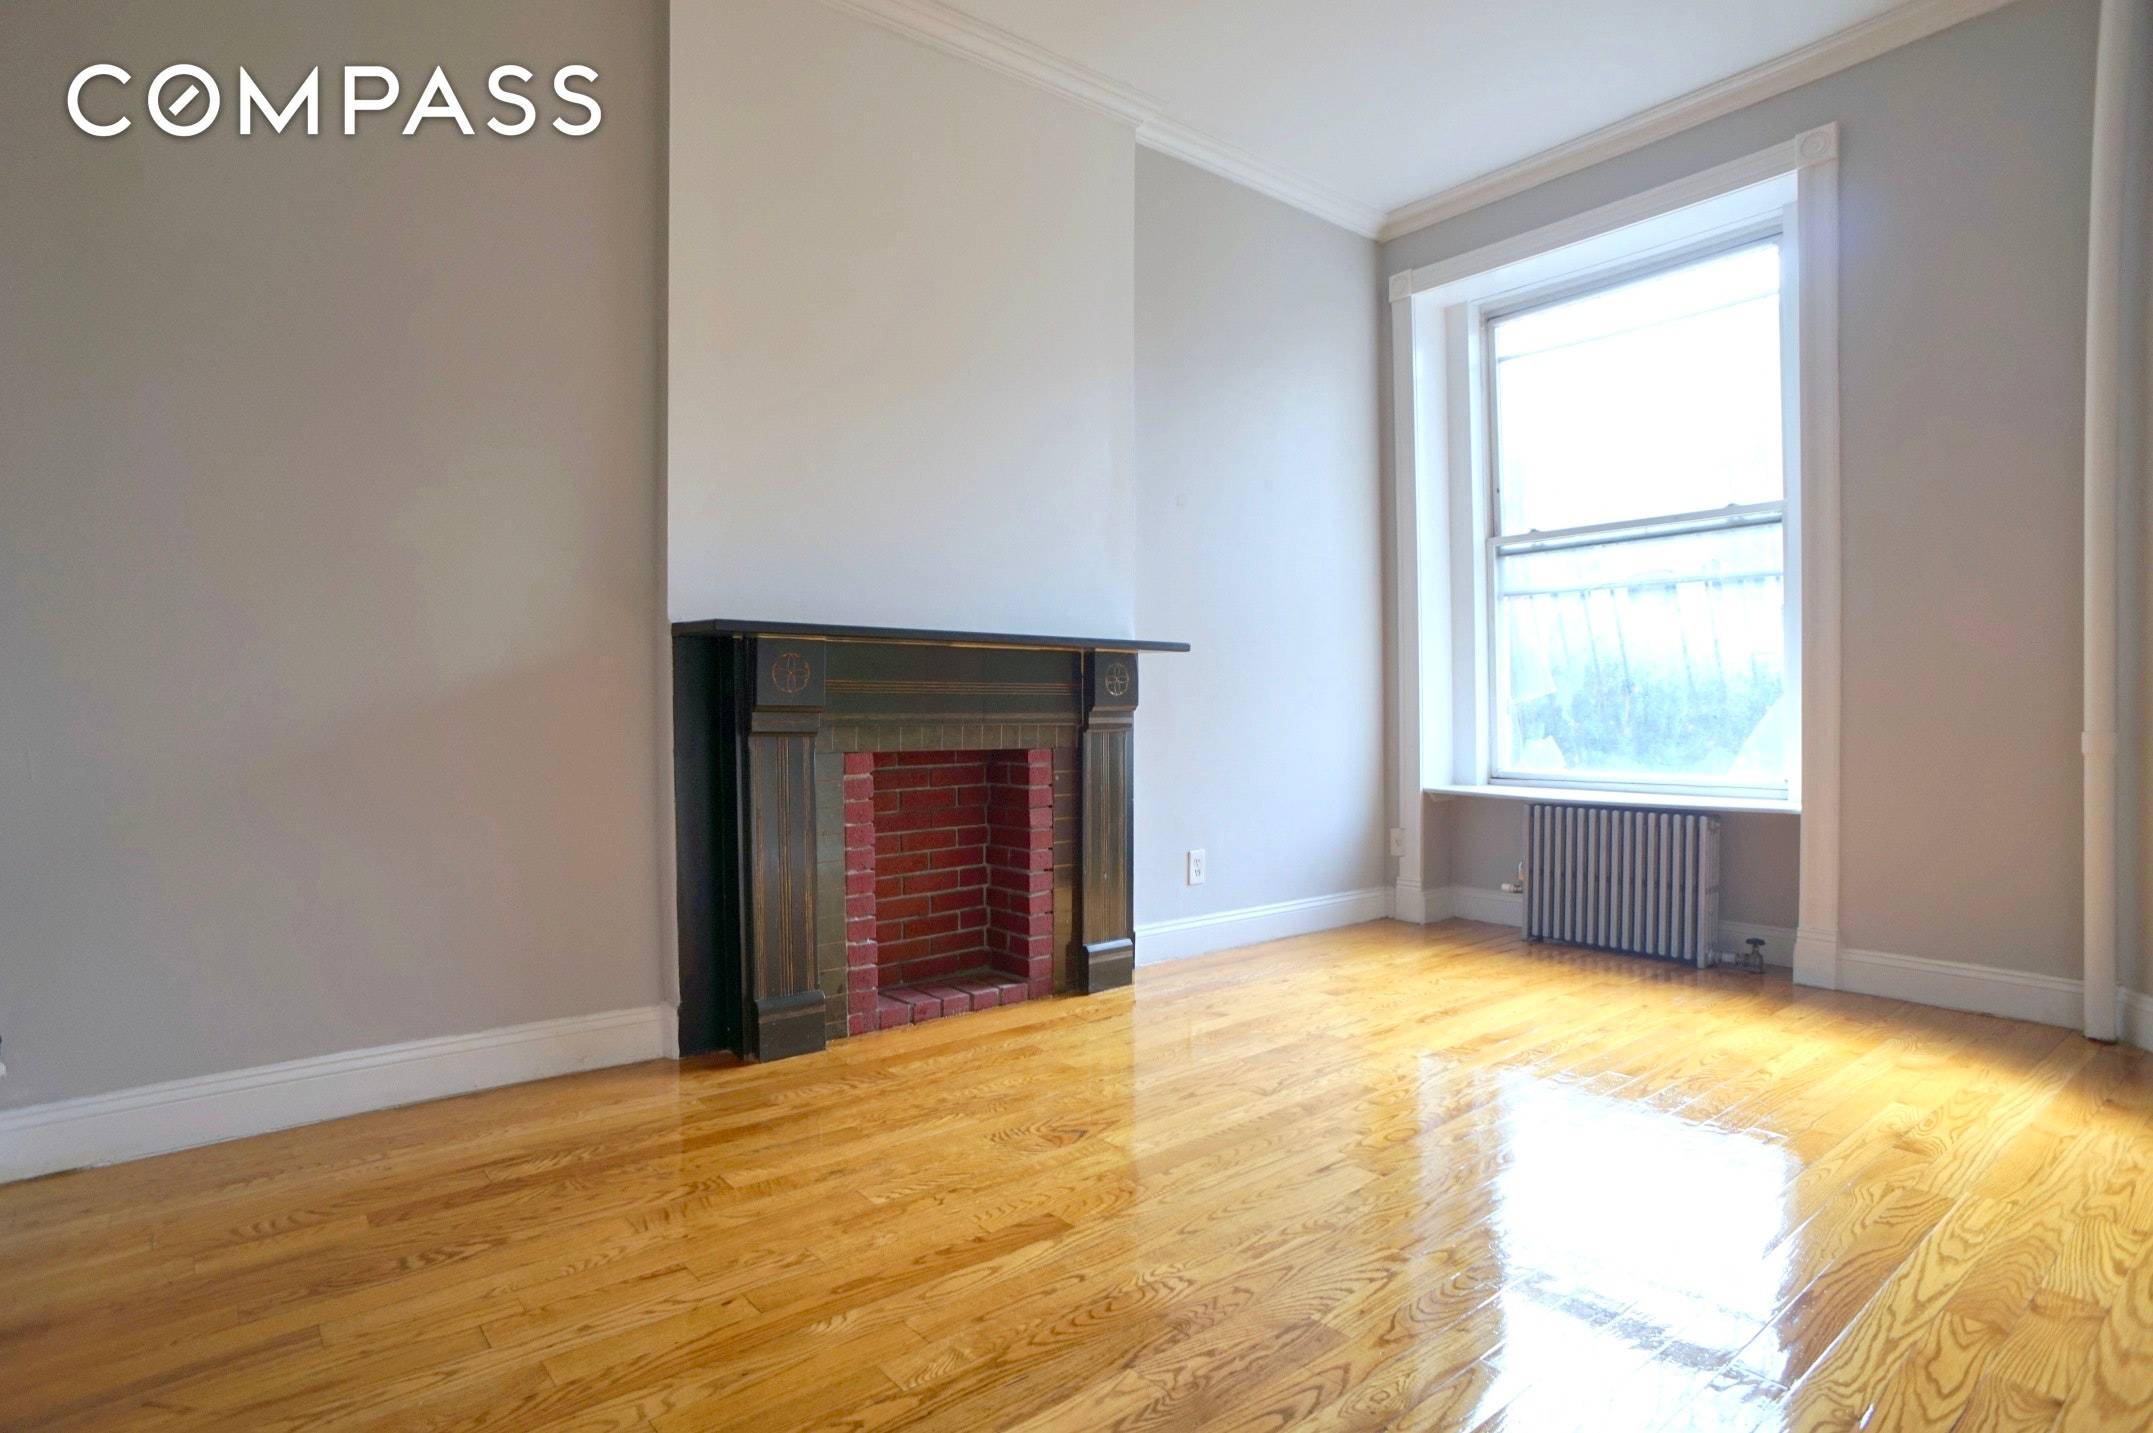 Renovated two bedroom, 1 bath apartment with two entrances, decorative and wood burning fireplaces, excellent storage and private outdoor space located minutes from the train in South Slope Greenwood.